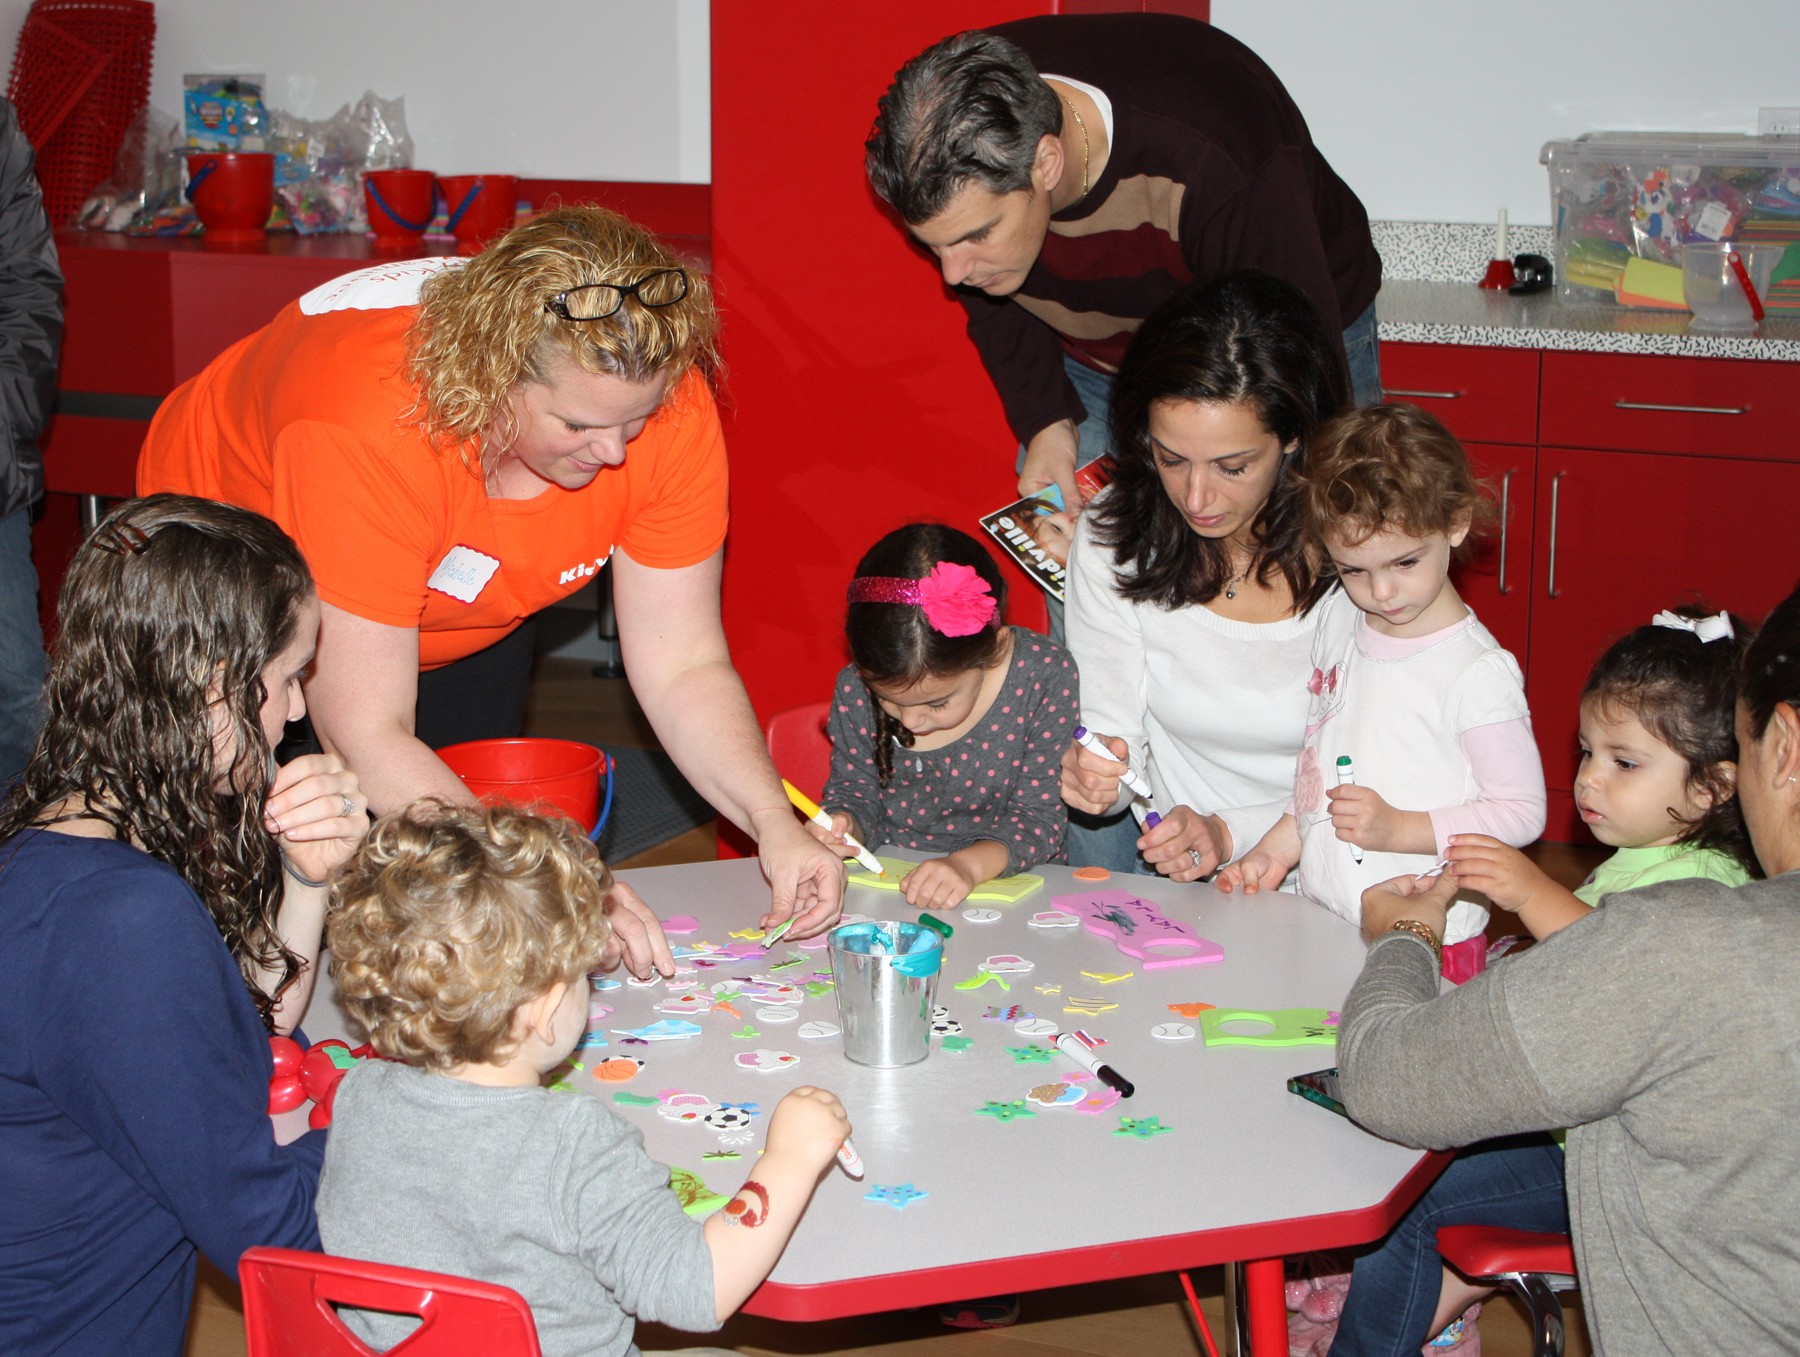 Children and parents participated in a fun arts & crafts project at Kidville Mount Kisco’s Grand Opening celebration.